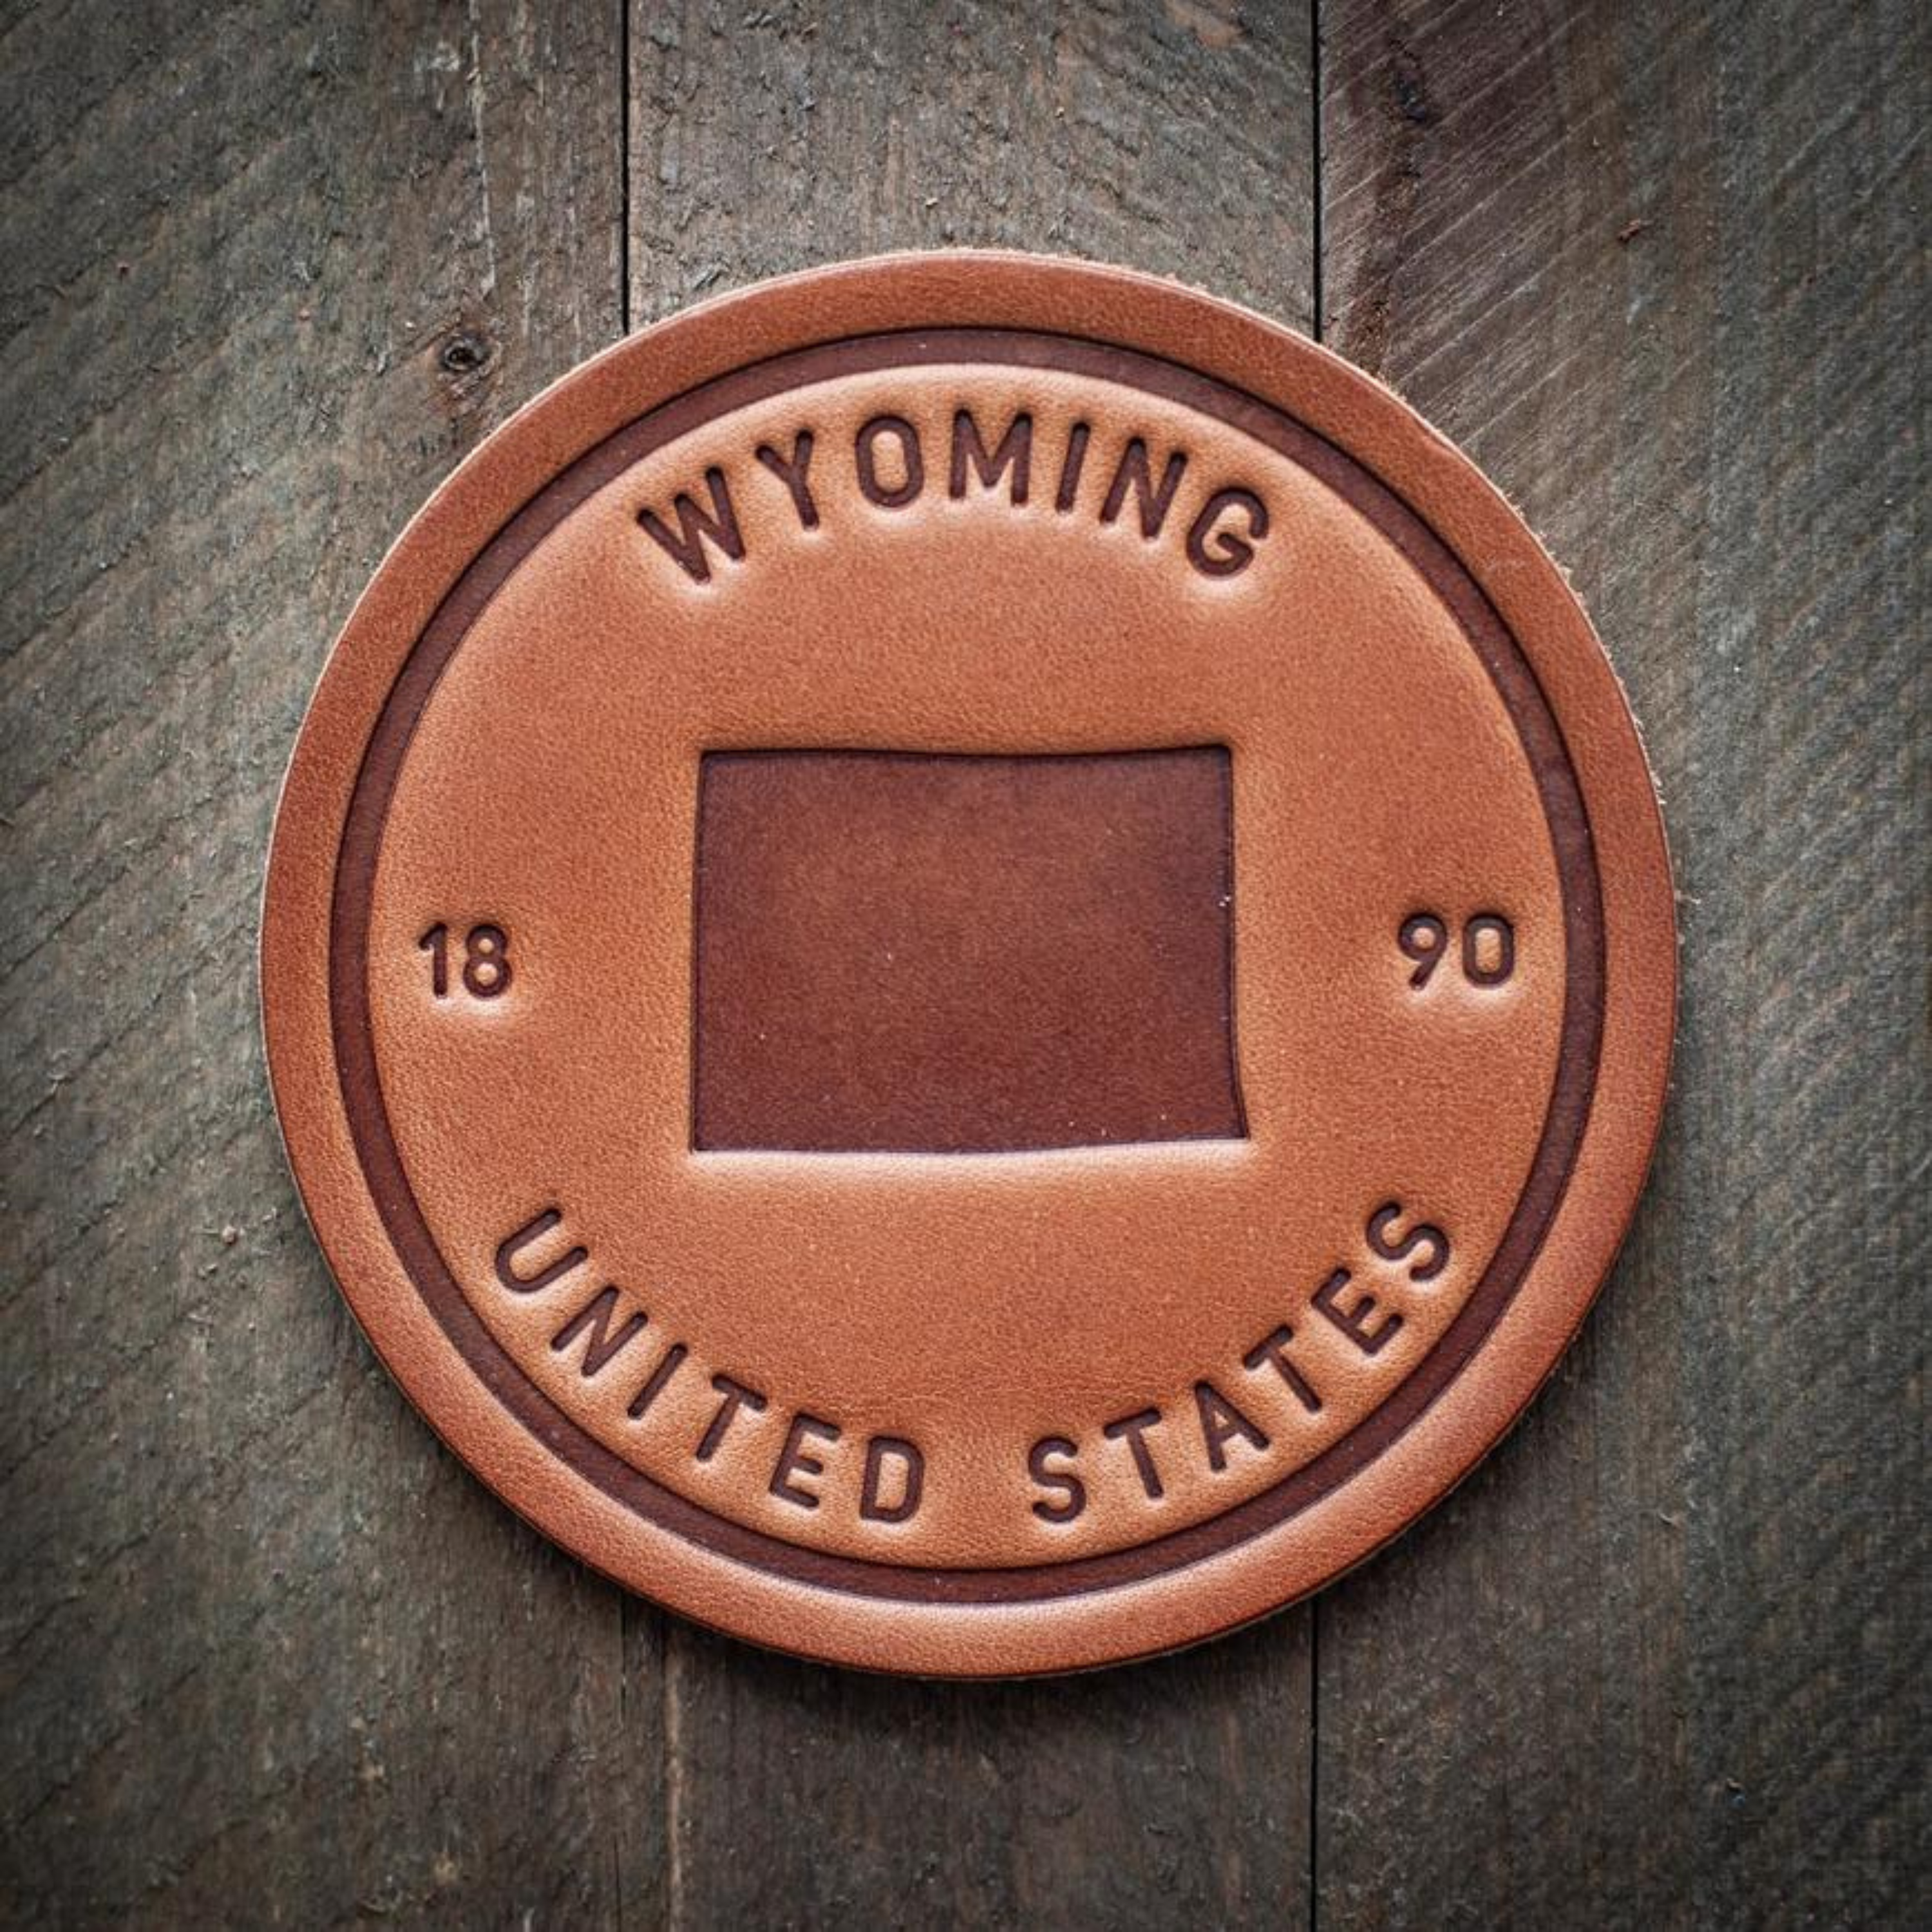 Wyoming State Silhouette Leather Coaster